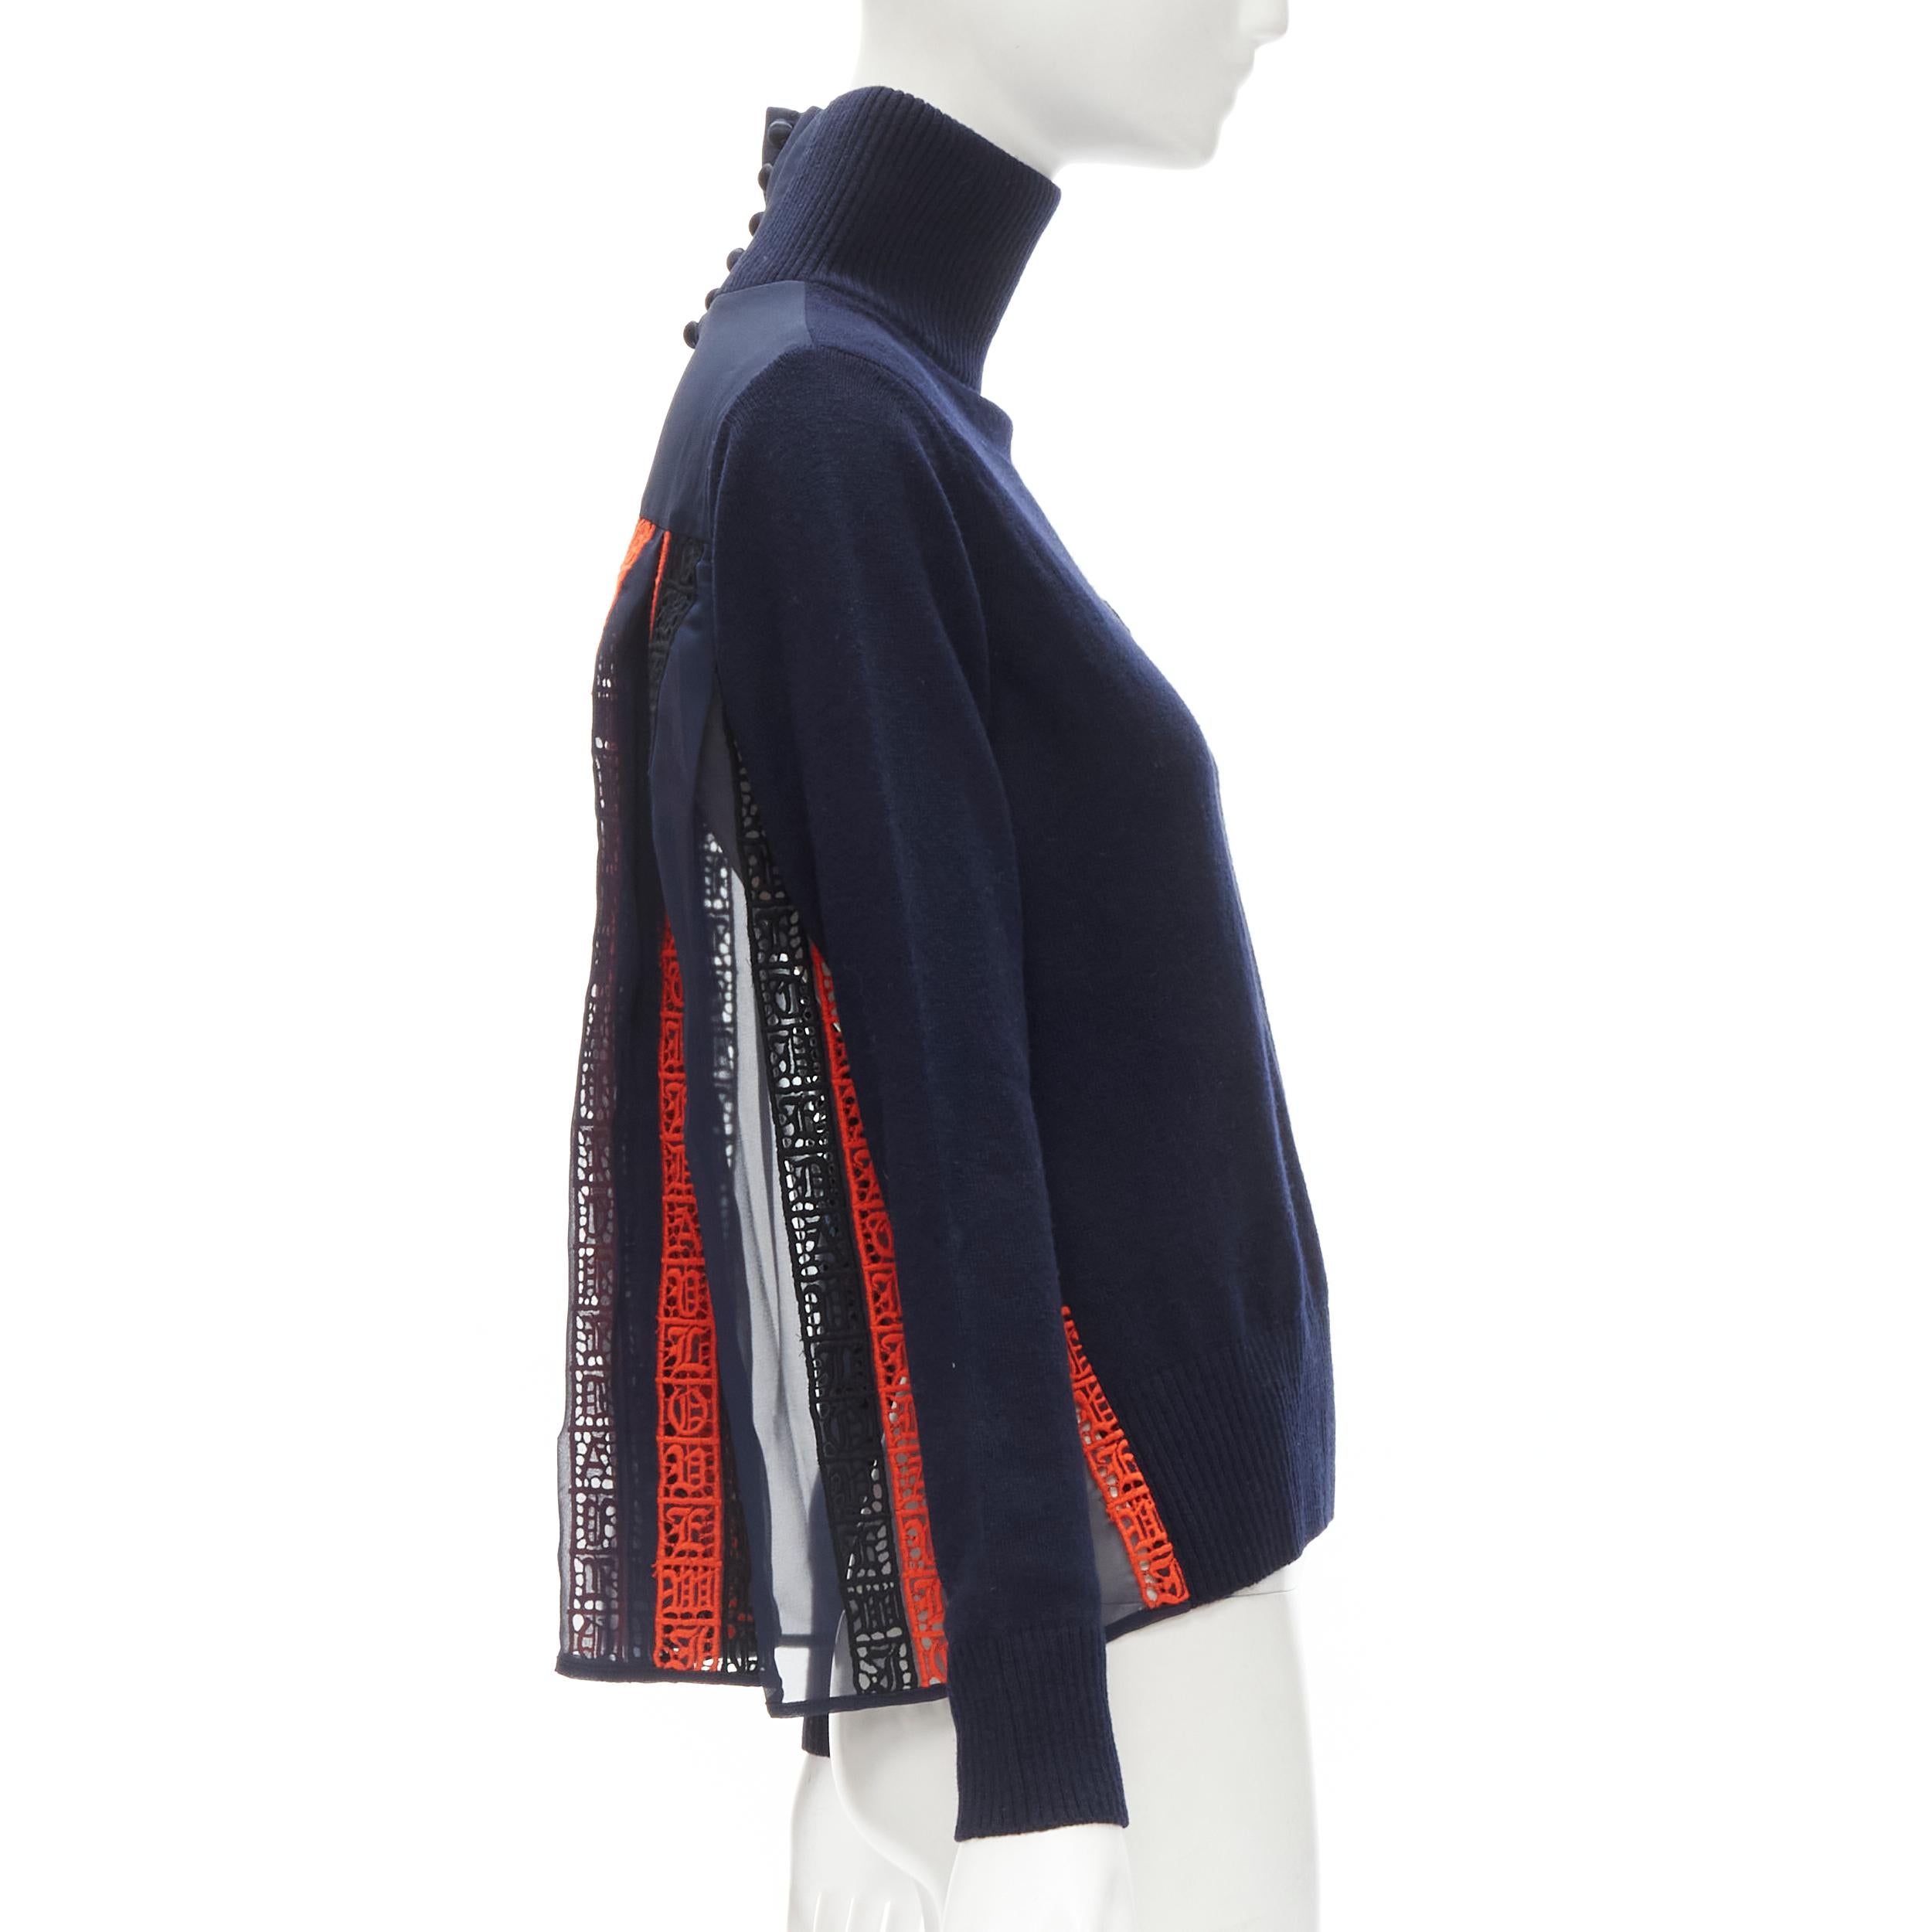 SACAI 100% wool navy red striped embroidery anglais flared turtleneck JP1 S
Brand: Sacai
Designer: Chitose Abe
Collection: 2016 
Material: 100% Wool
Color: Navy
Pattern: Solid
Closure: Button
Extra Detail: Crepe silk flared back with embroidery